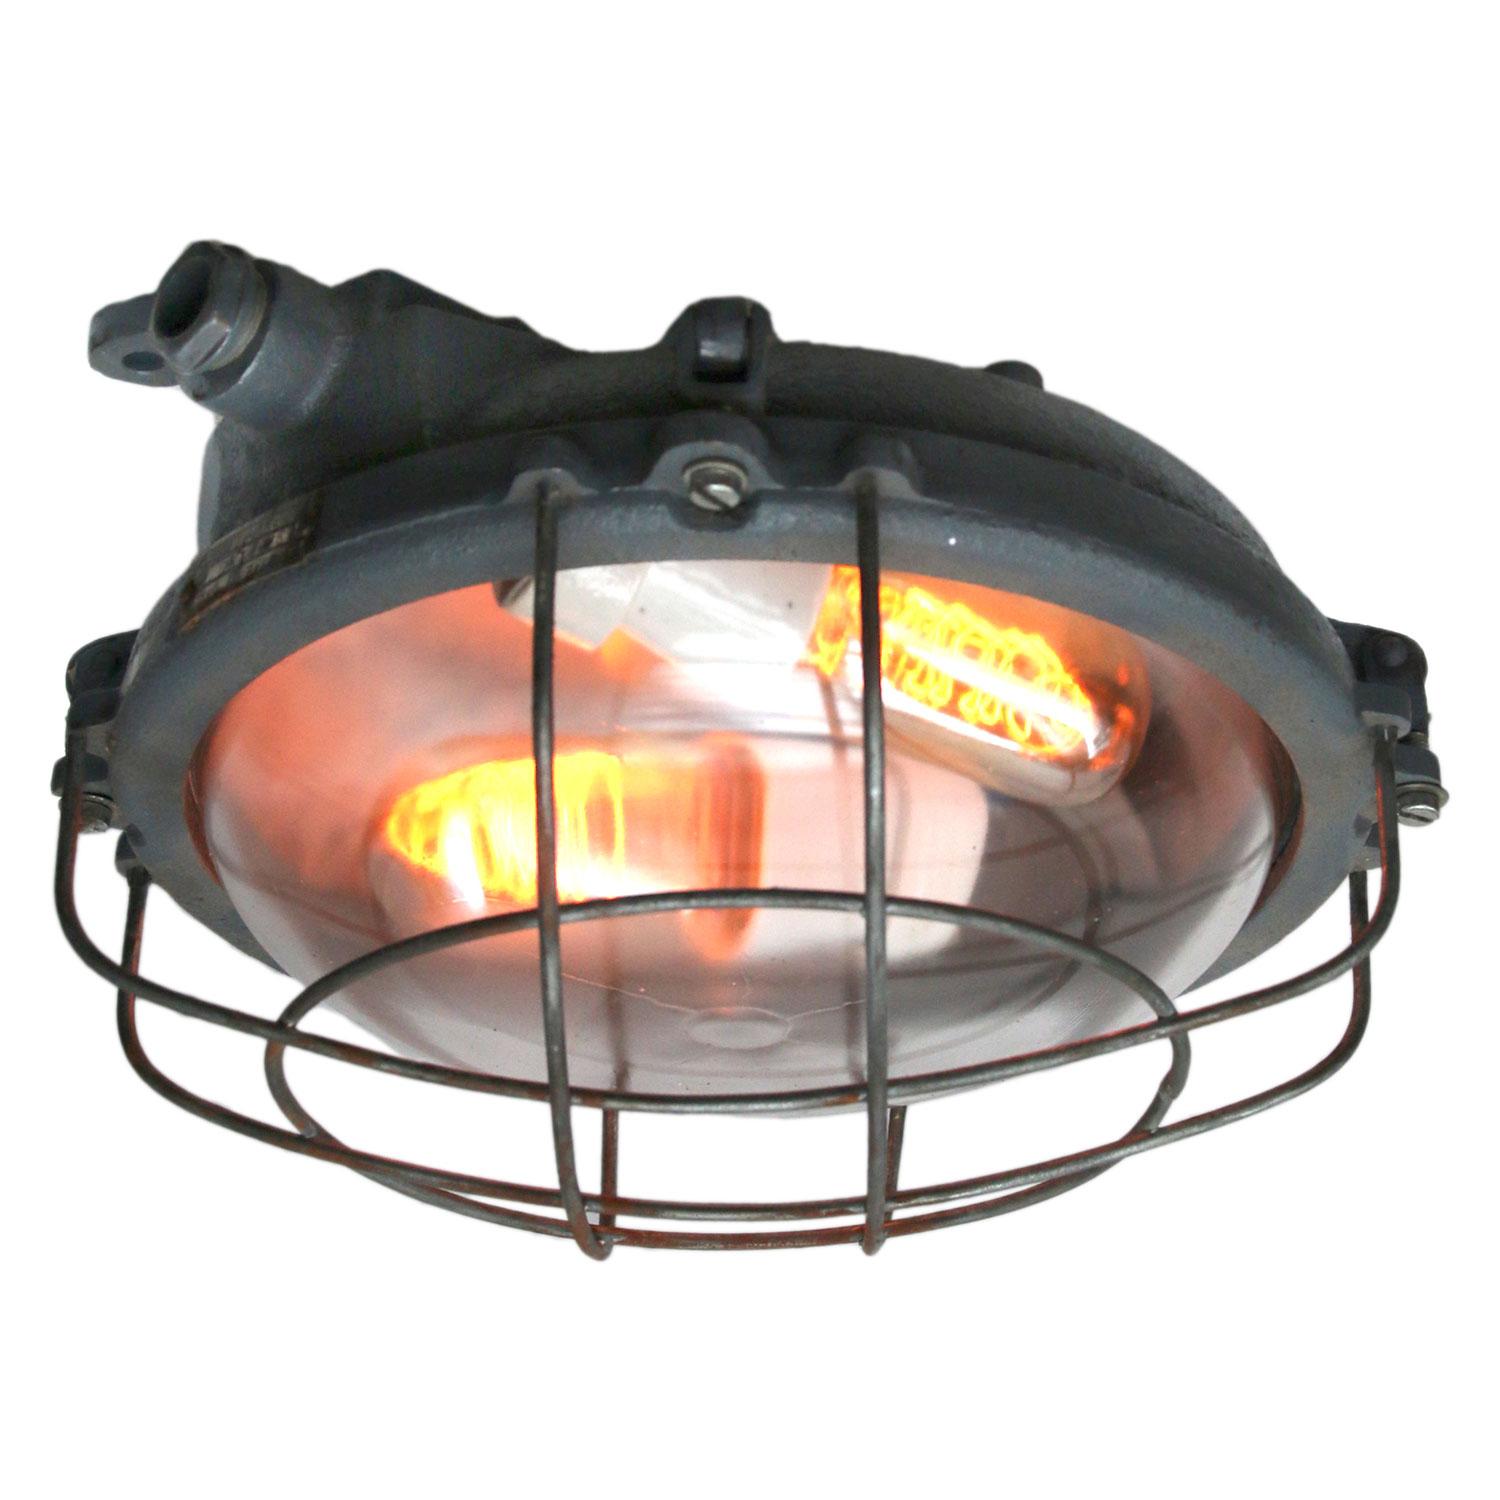 Industrial wall and ceiling scone. Grey cast iron.
Clear glass. Double bulb holder.

Weight: 4.5 kg / 9.9 lb

Priced individual item. All lamps have been made suitable by international standards for incandescent light bulbs, energy-efficient